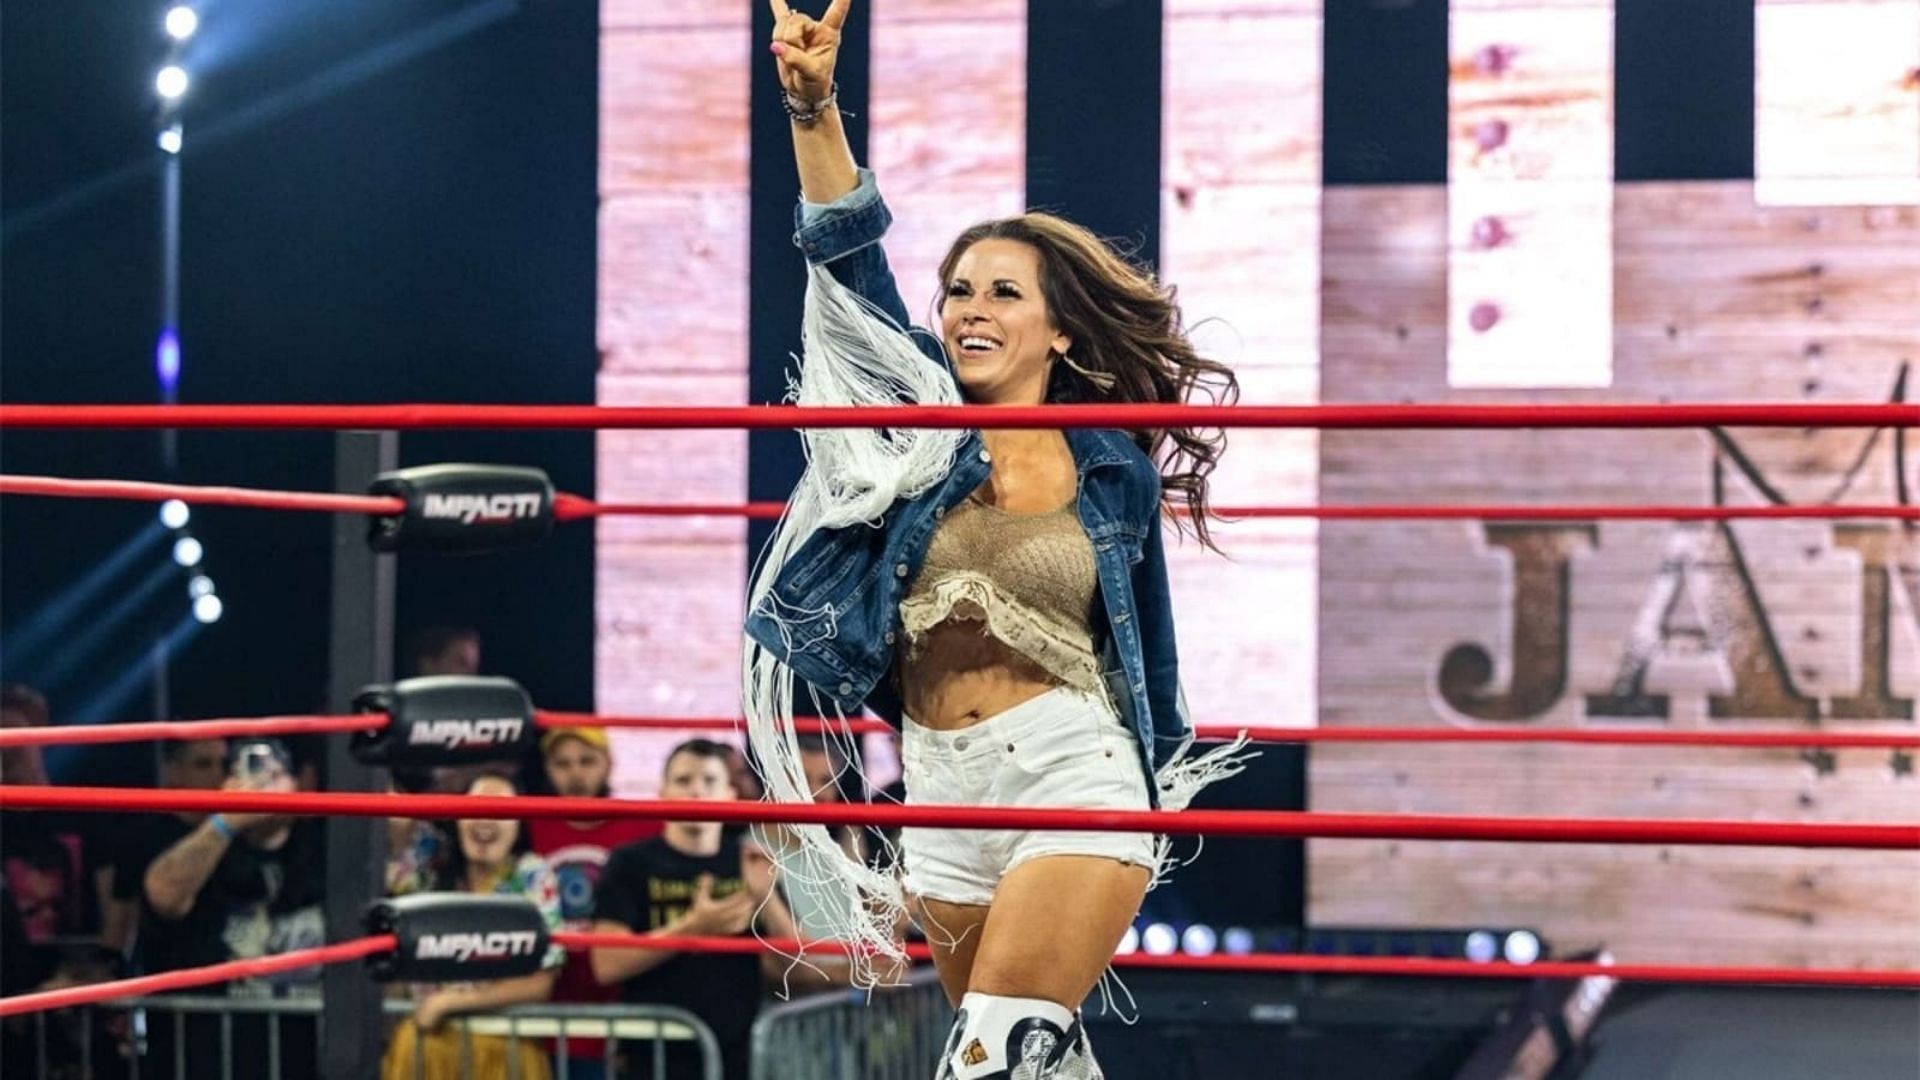 Mickie James is a former five-time WWE women